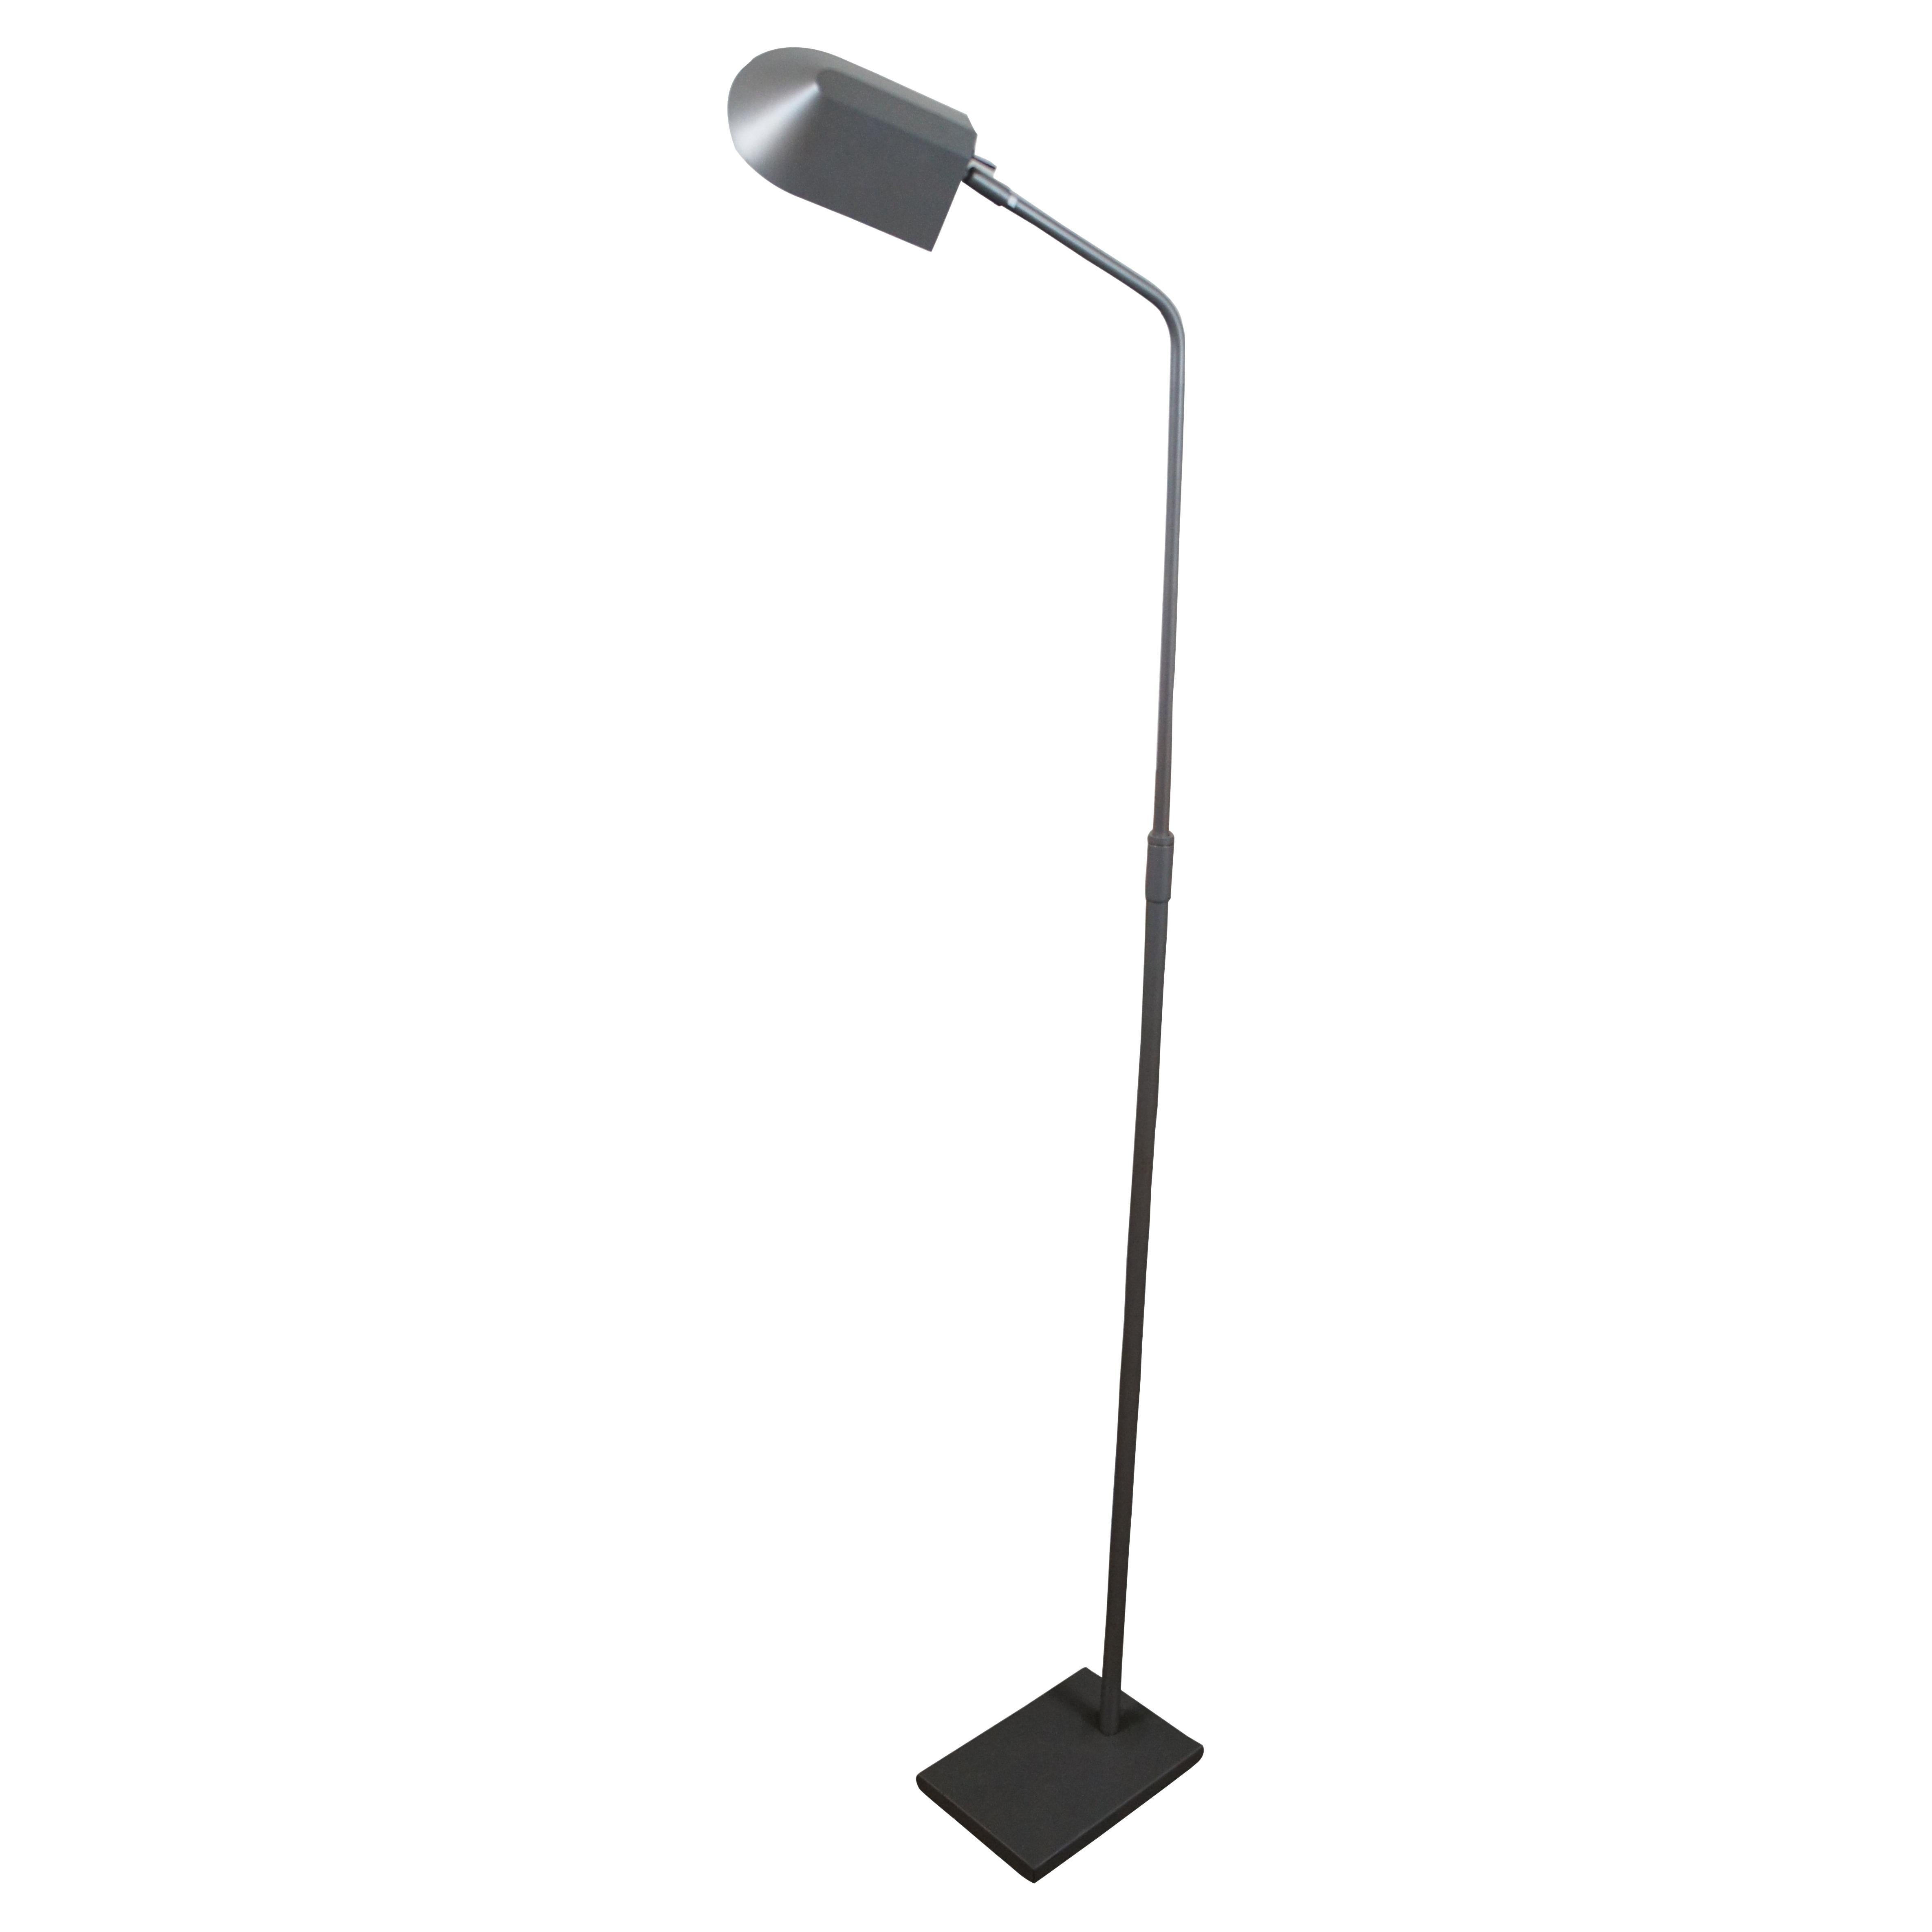 Vintage 1990s Robert Sonneman for George Kovacs adjustable height pharmacy / library or reading floor lamp in grey.

15” x 6.25” x 49.5” / height adjustable to 59.5